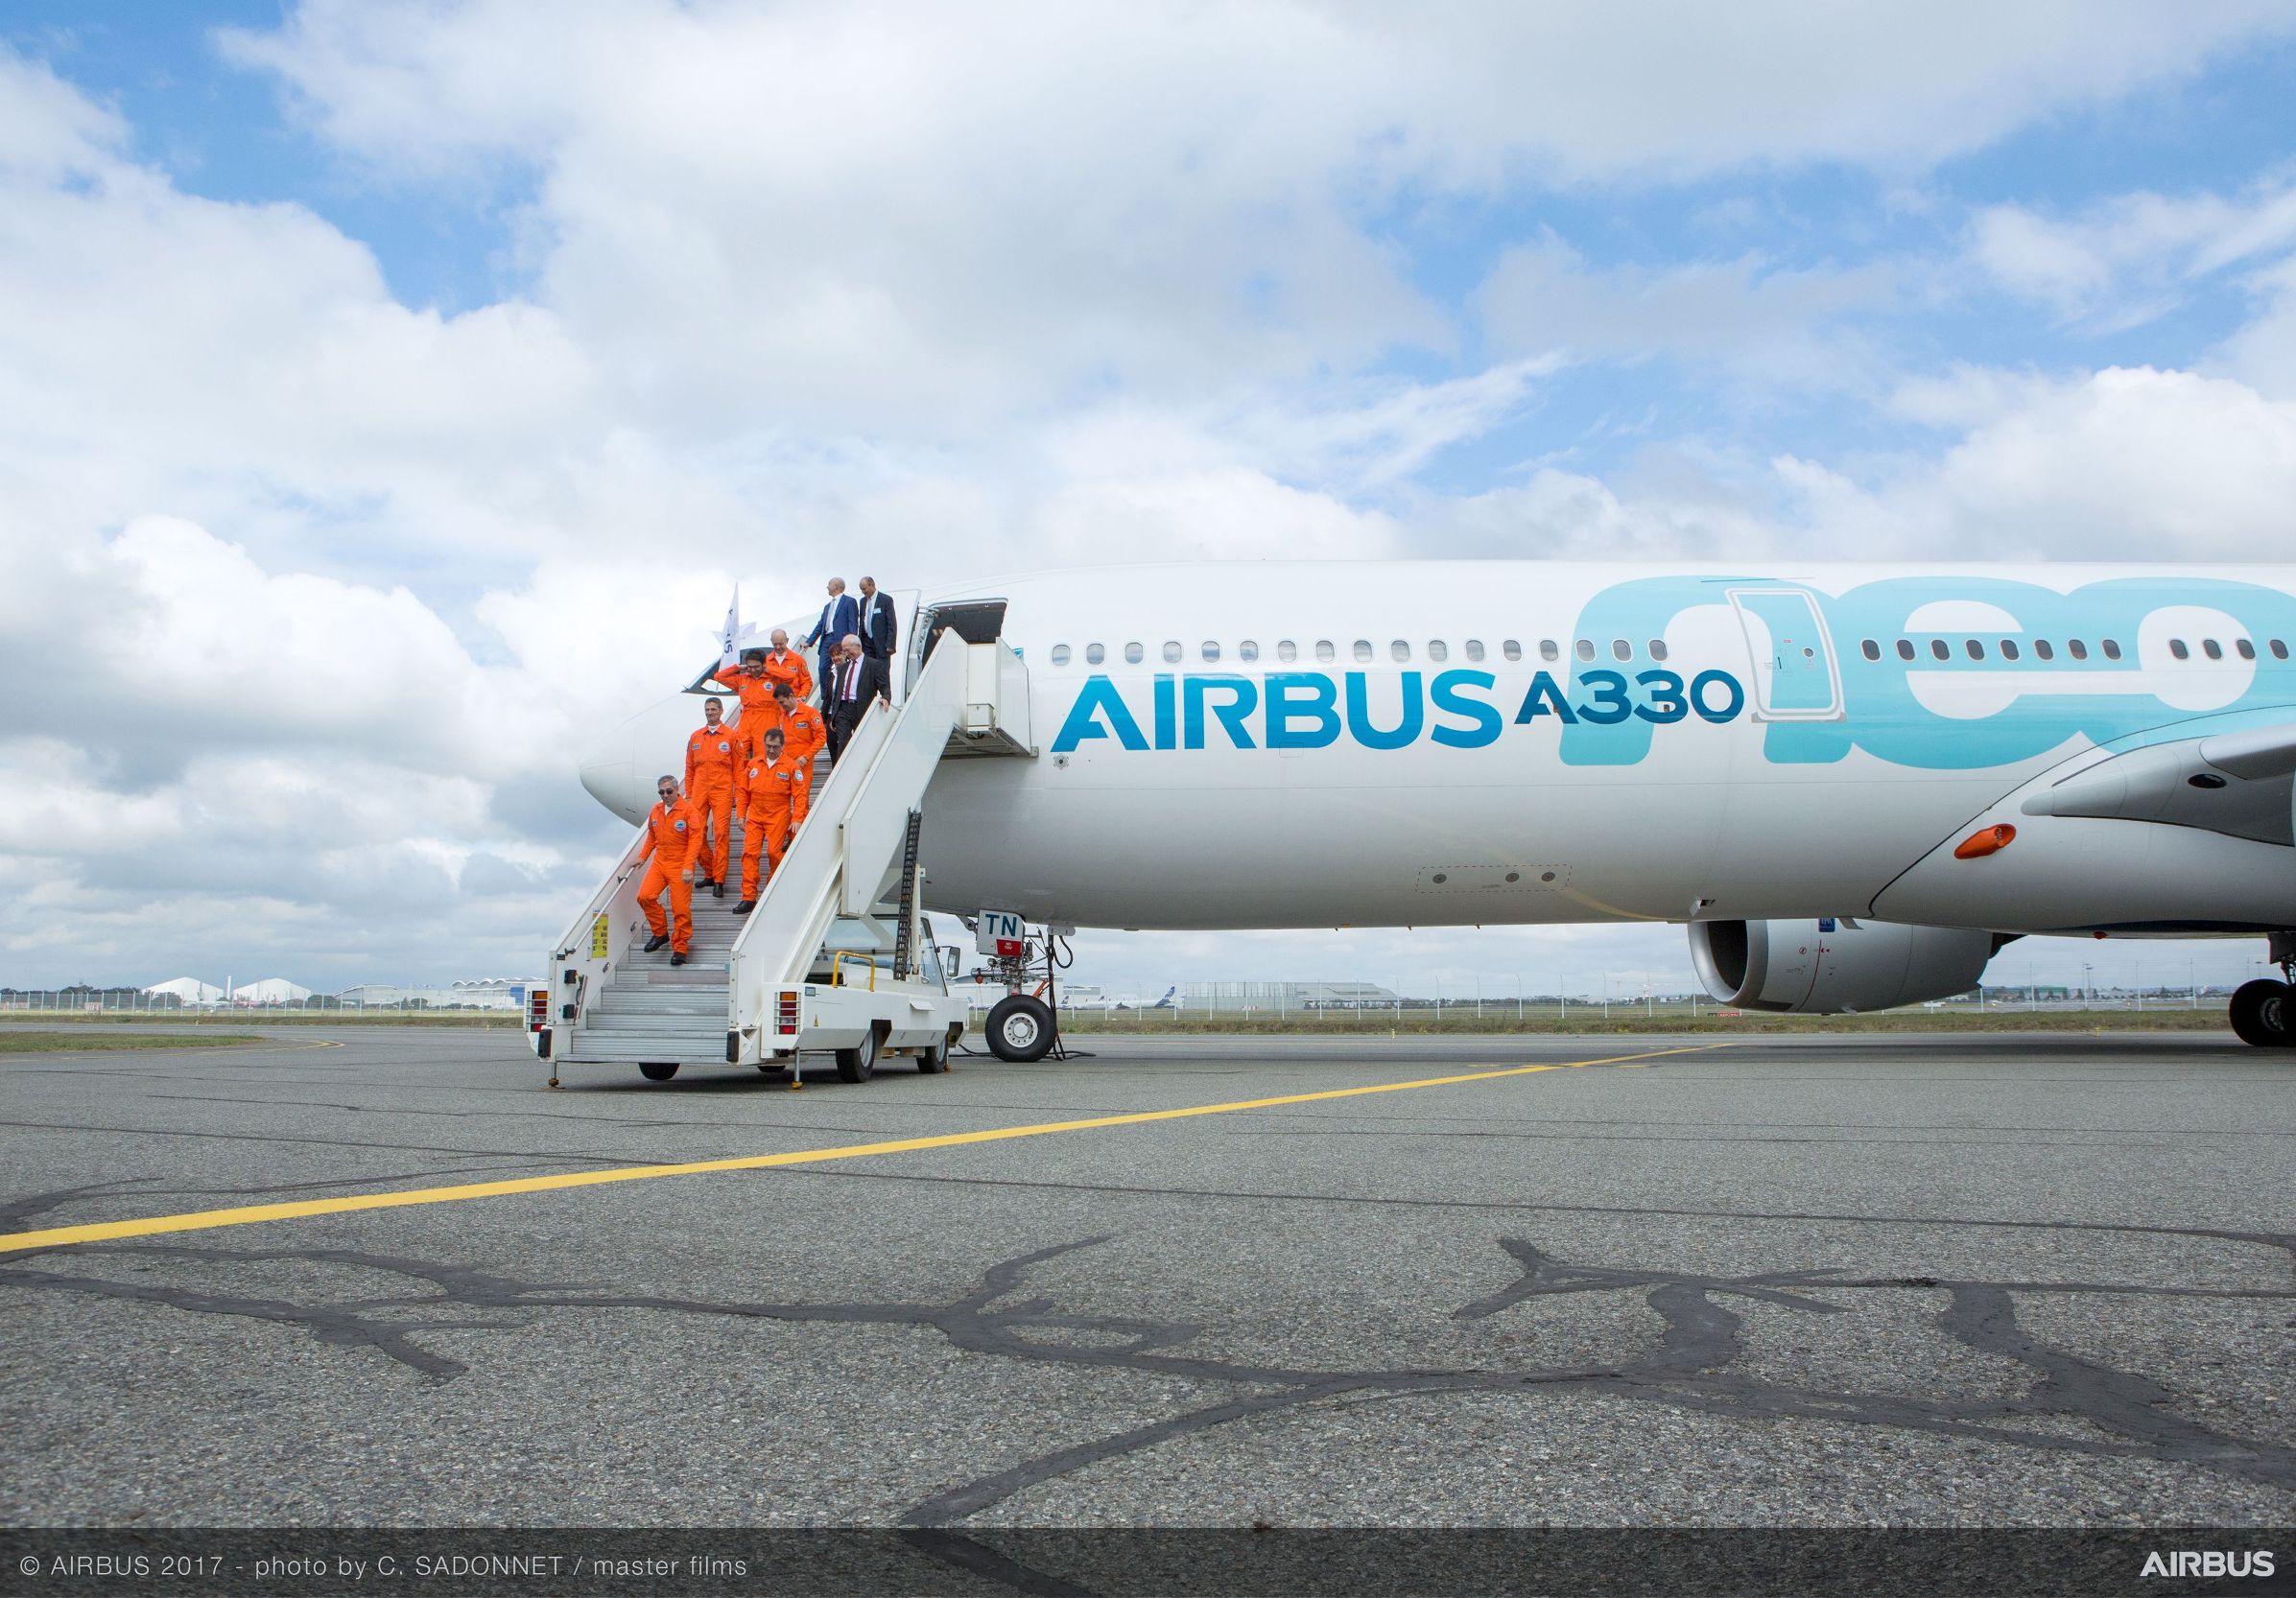 A journey back to Airbus heritage